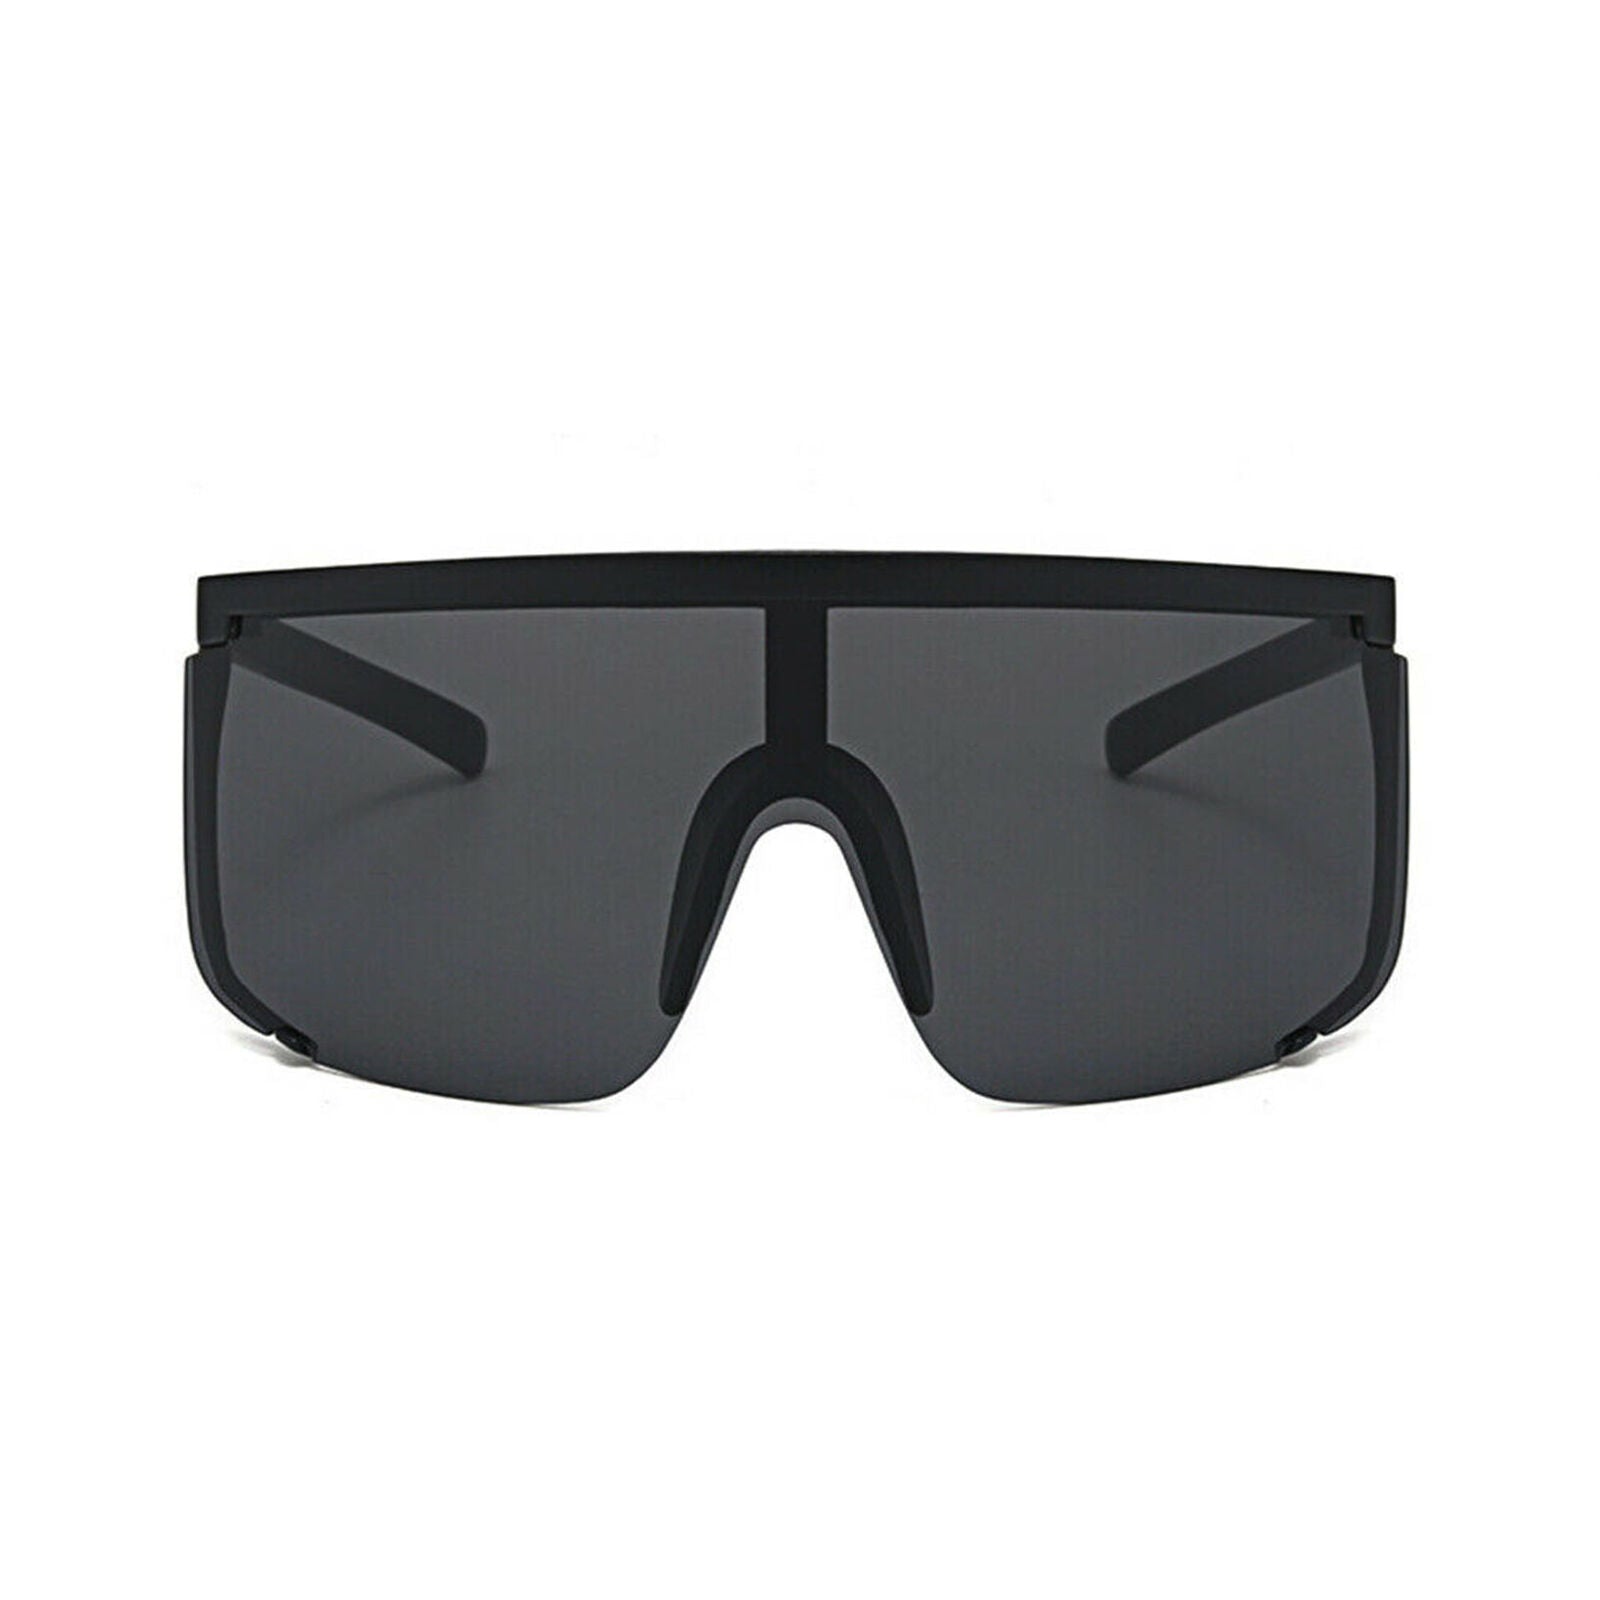 Oversized Mirrored Shield Sunglasses Outdoor Sport Protection Goggles UV Glasses